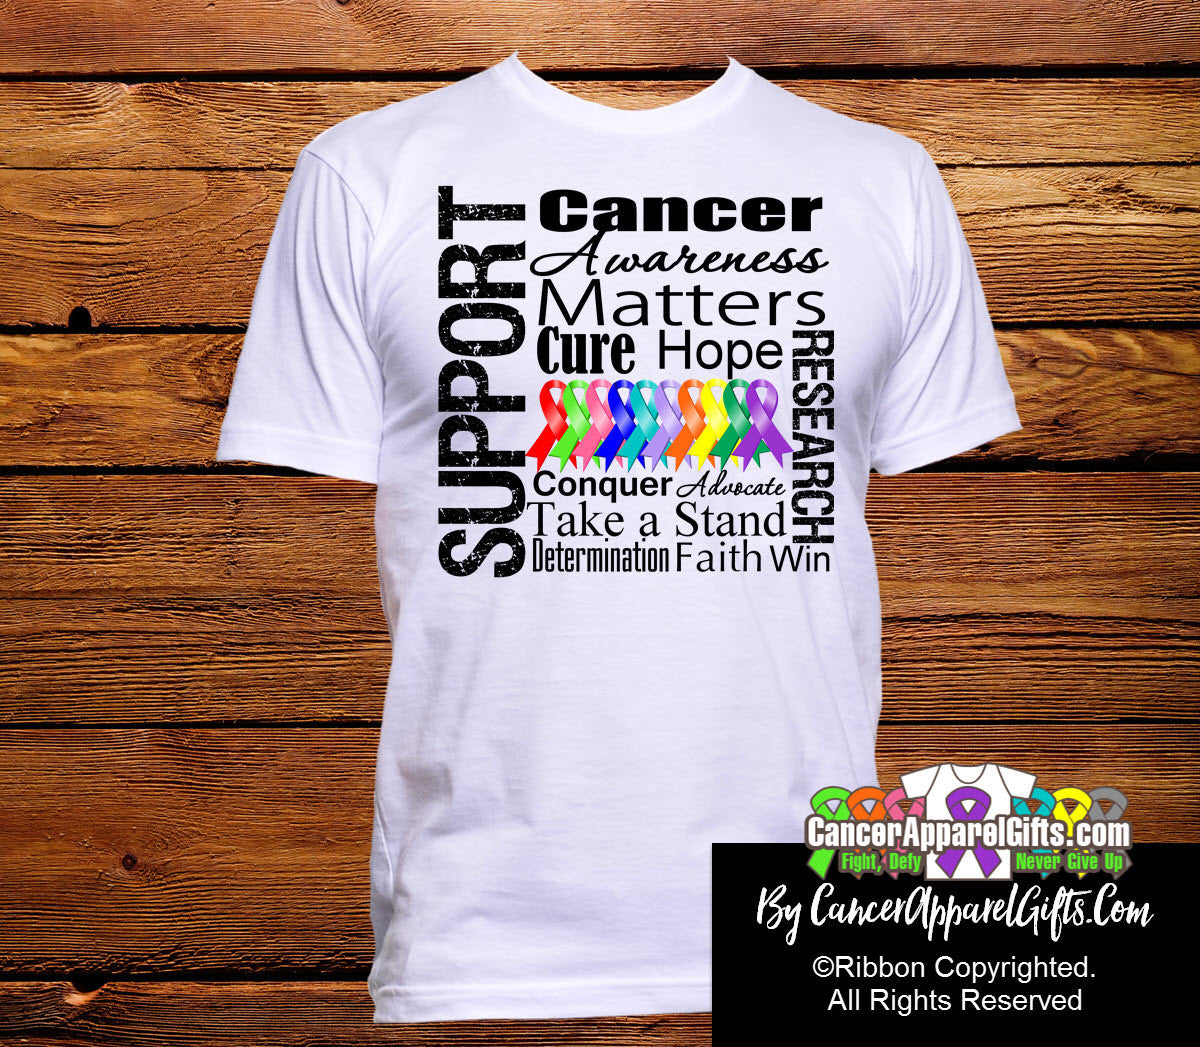 Cancer Shirt Designs - Fundraise for Cancer with Custom Shirts